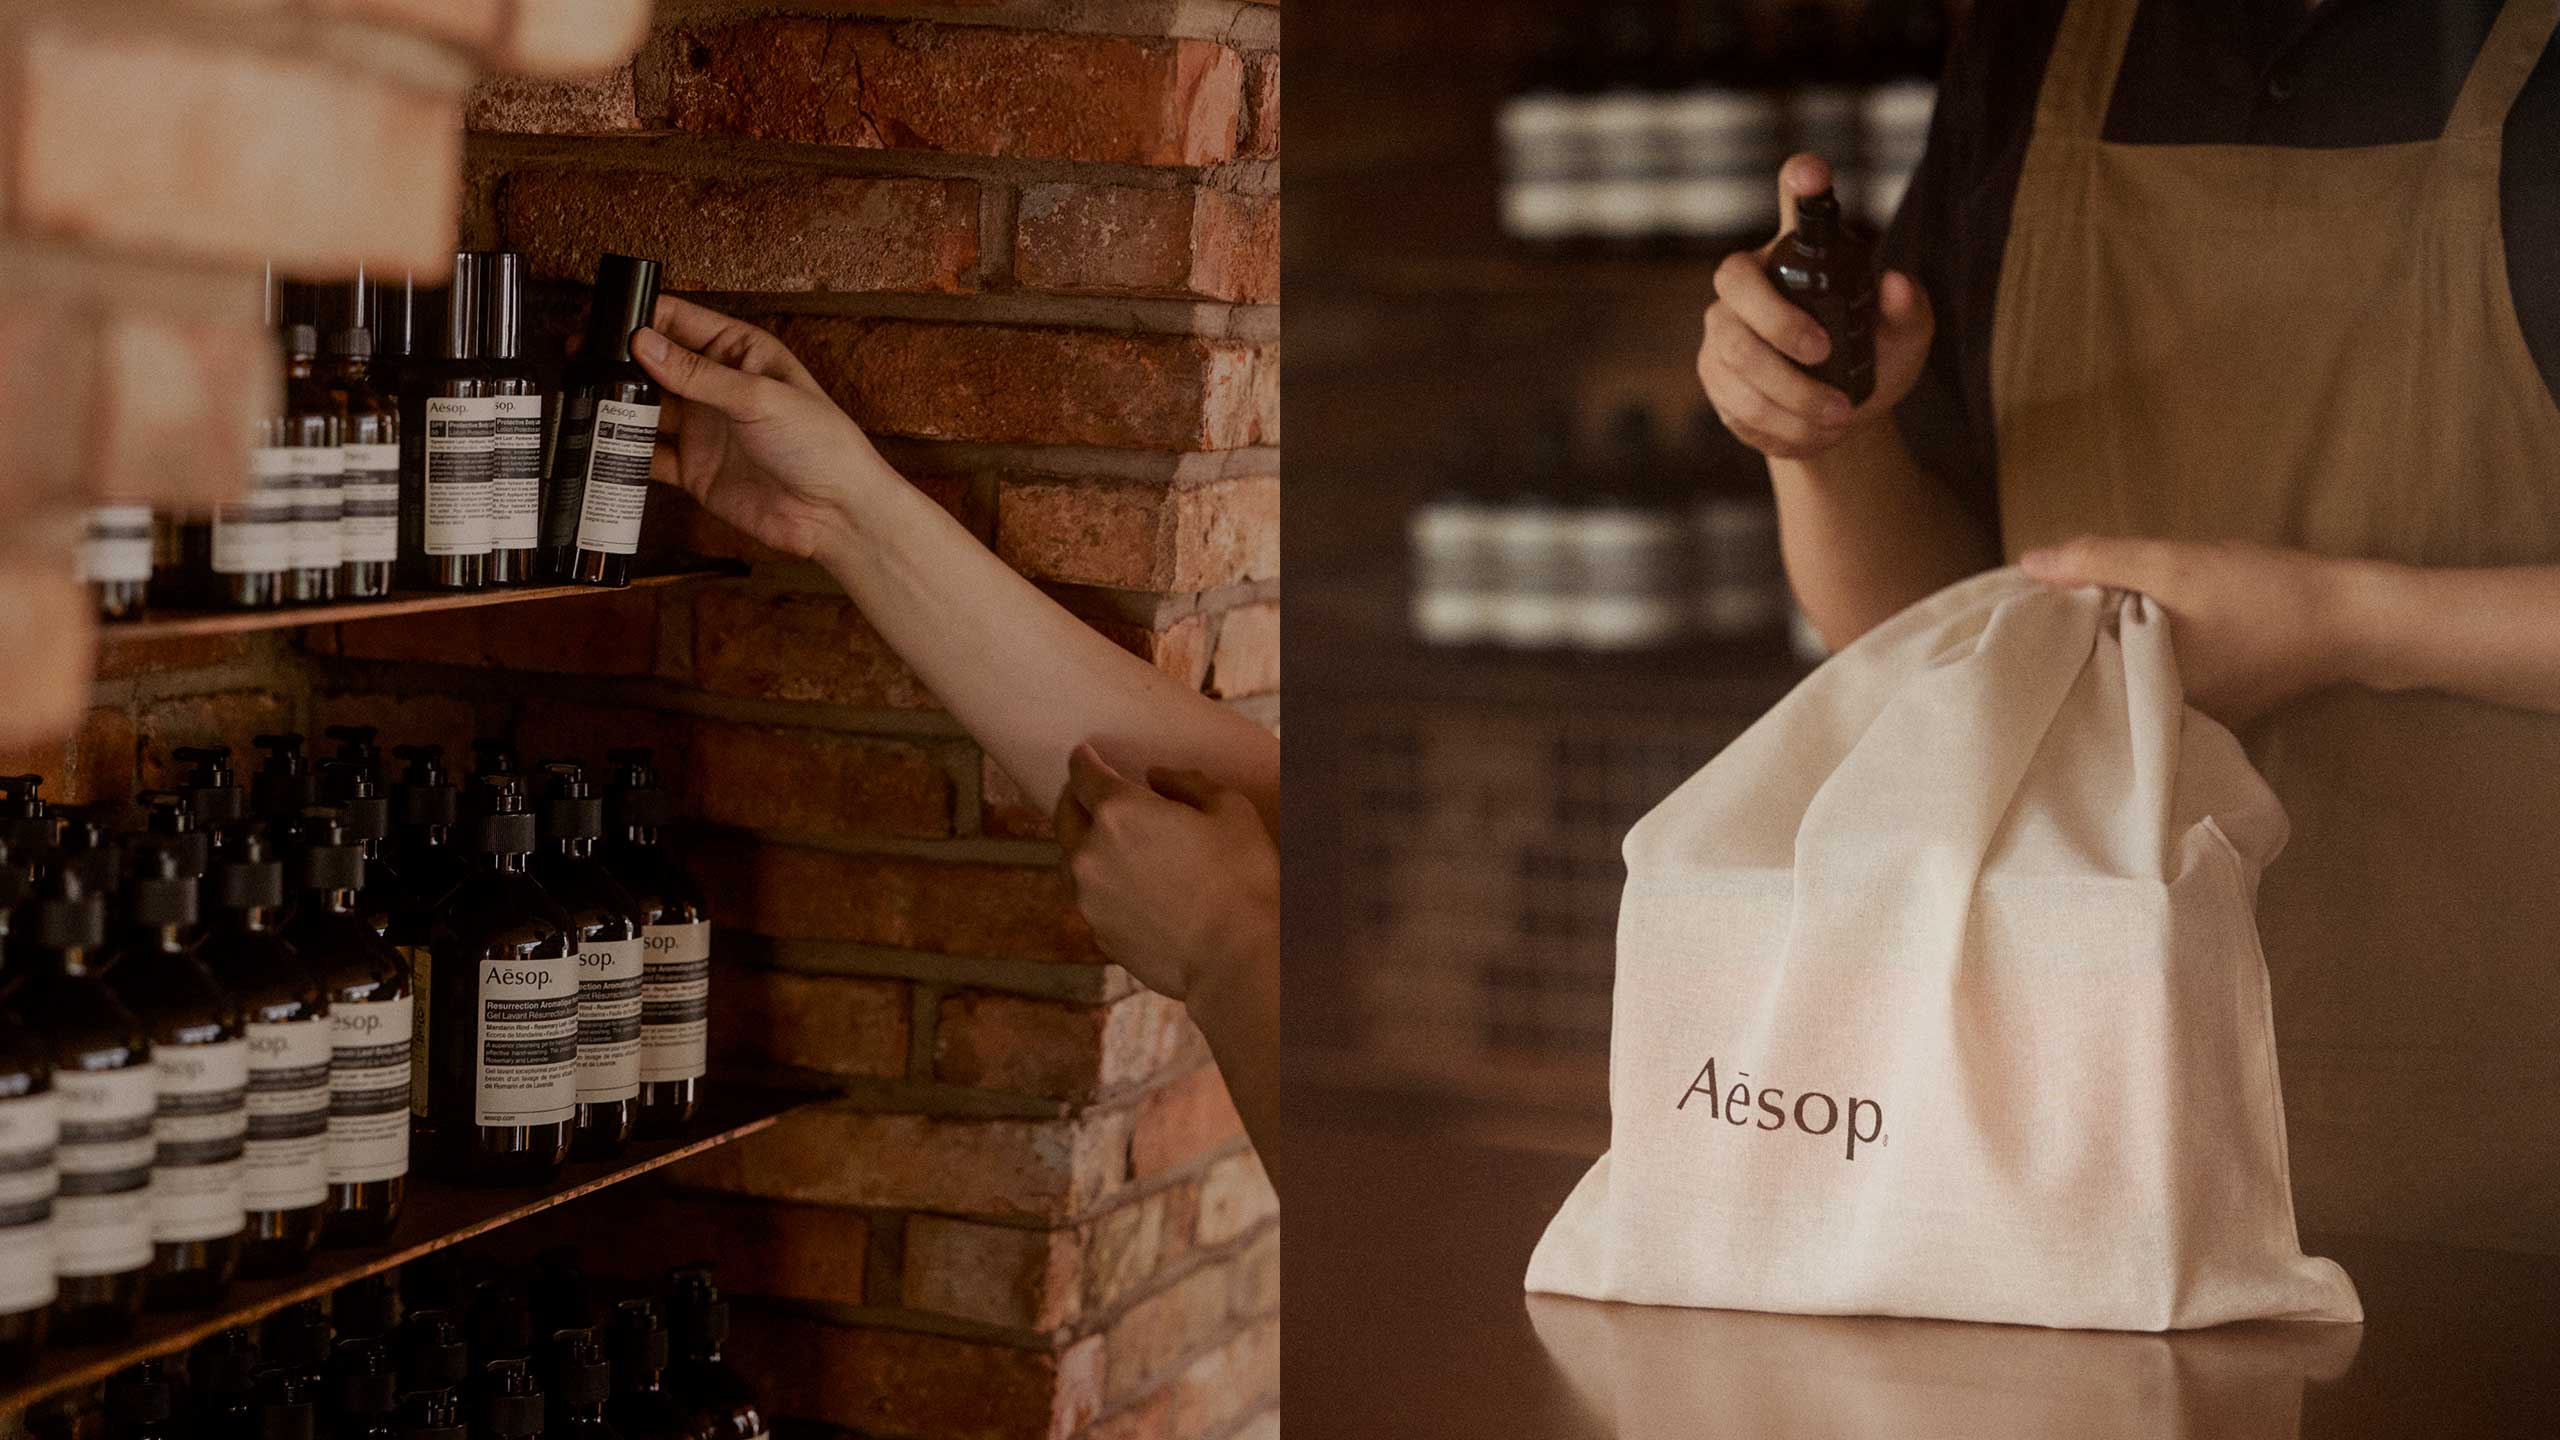 A hand reaching out for Aesop products and a hand spritzing Aesop fragrance on a cotton bag